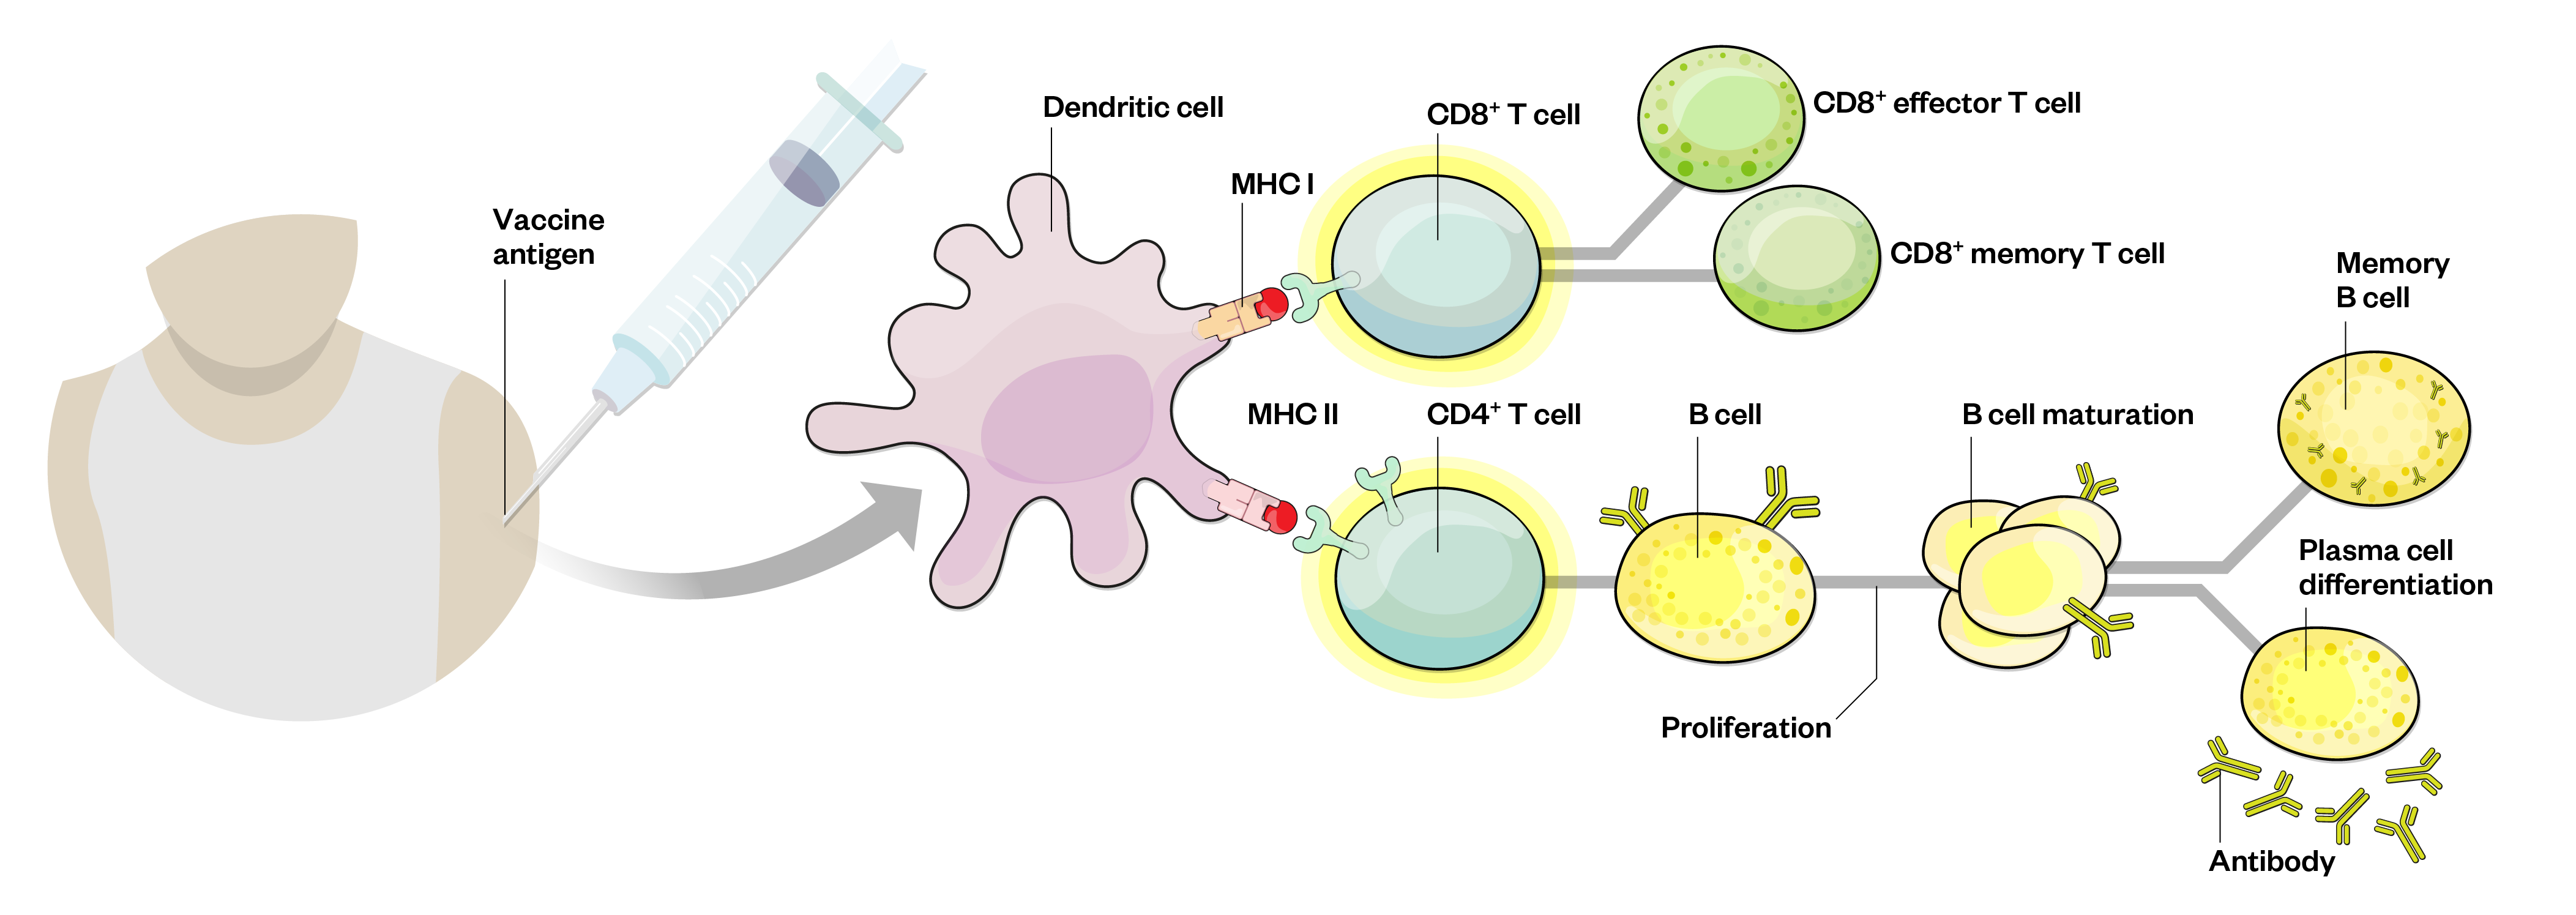 figure 2: vaccine-mediated immune response. Recognition of antigen at B- and T-cell level leads to proliferation, maturation, differentiation and production of effector T-cells and antibodies